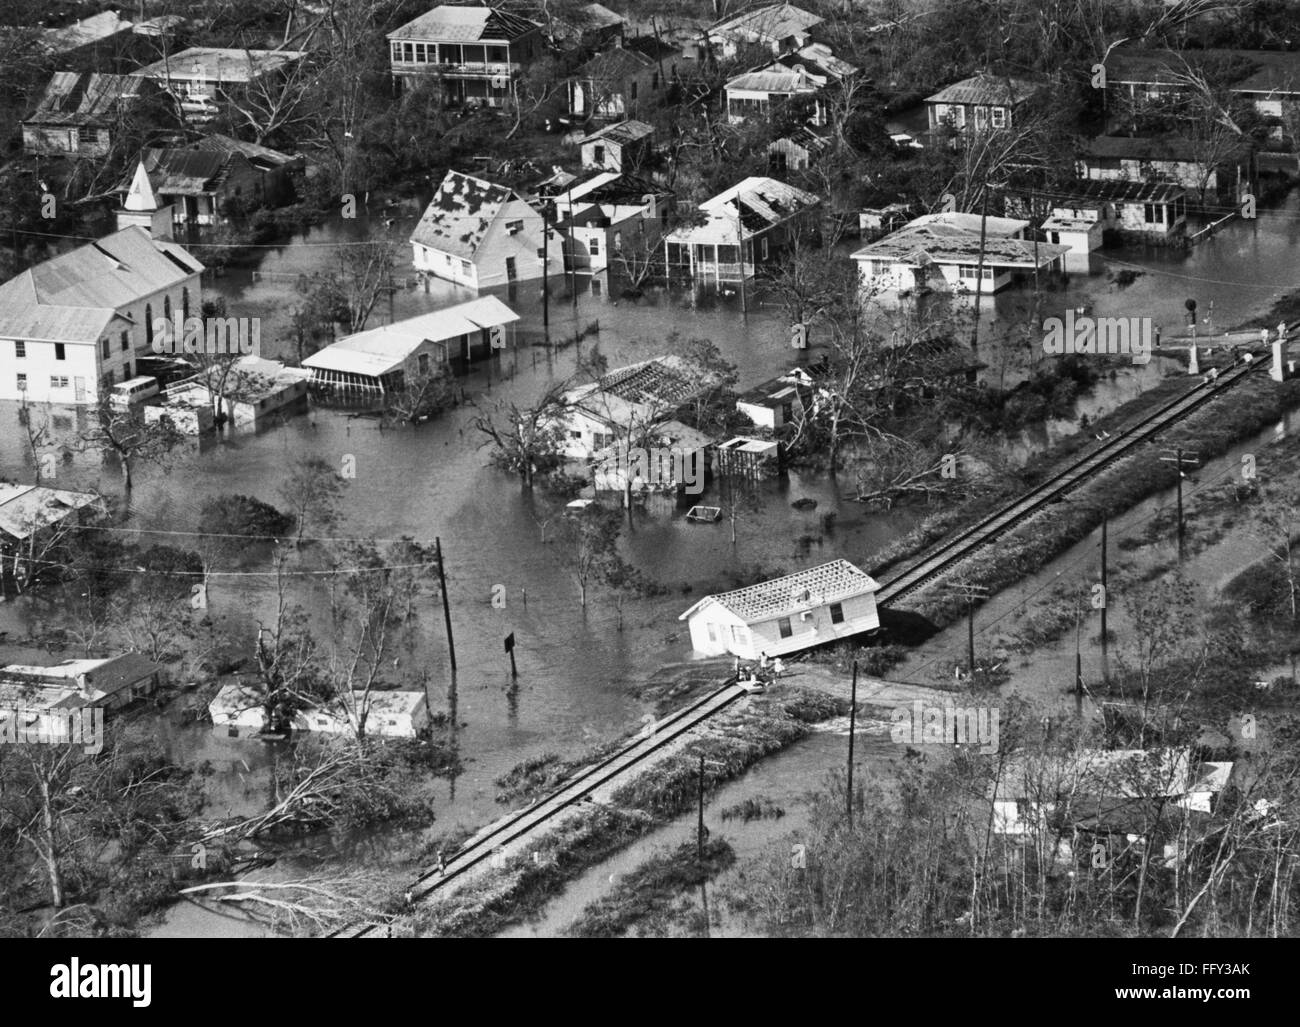 MISSISSIPPI: HURRICANE, 1969. /nAerial view of Gulfport, Mississippi, showing flooding in the aftermath of Hurricane Camille, 18 August 1969. Five people await evacuation on the railroad tracks, their home having been lifted onto the tracks by 150 mile an Stock Photo